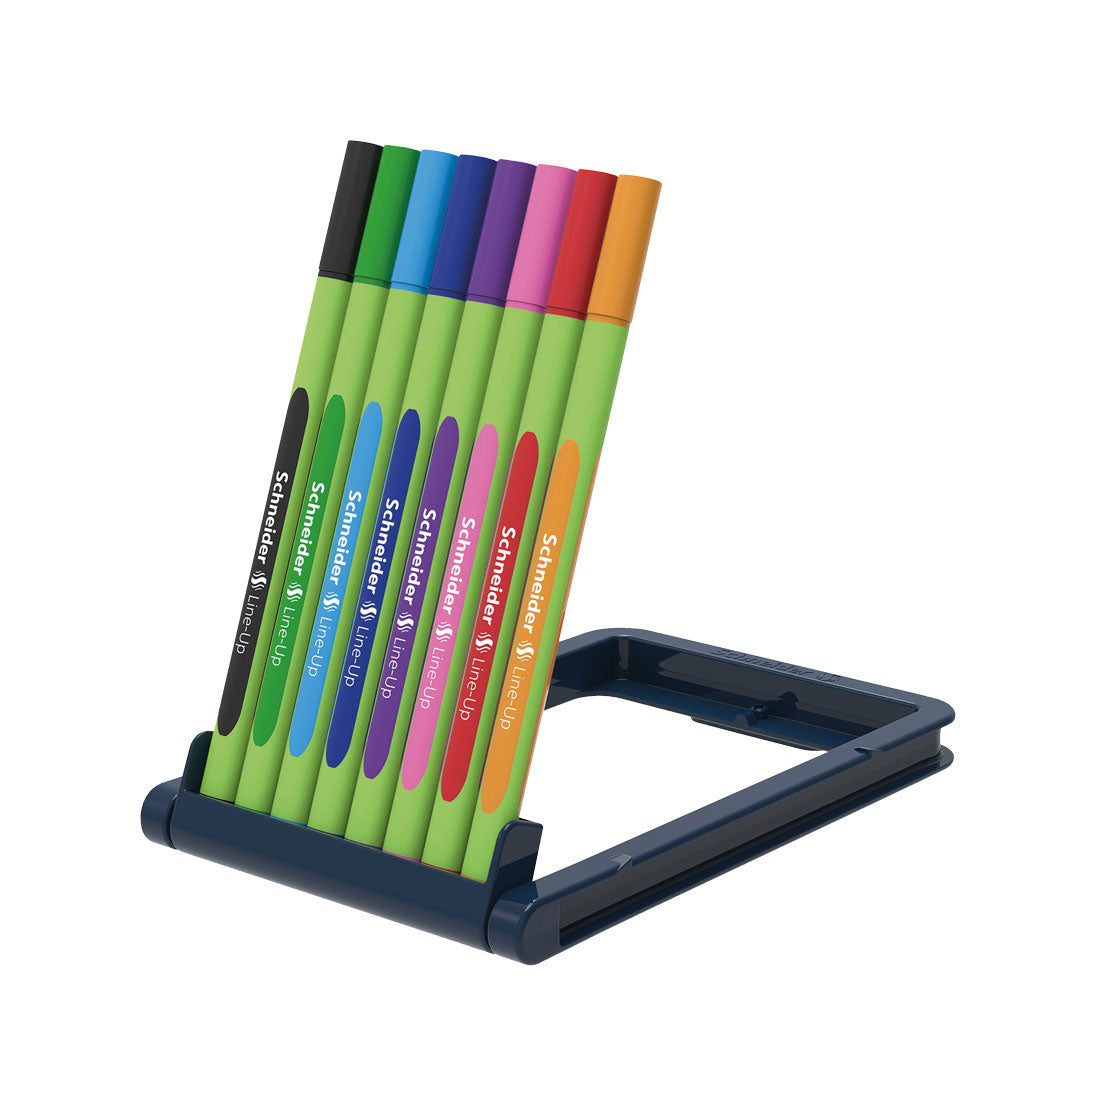 Line-Up Fineliners 0.4mm with Case stand, 8 pieces